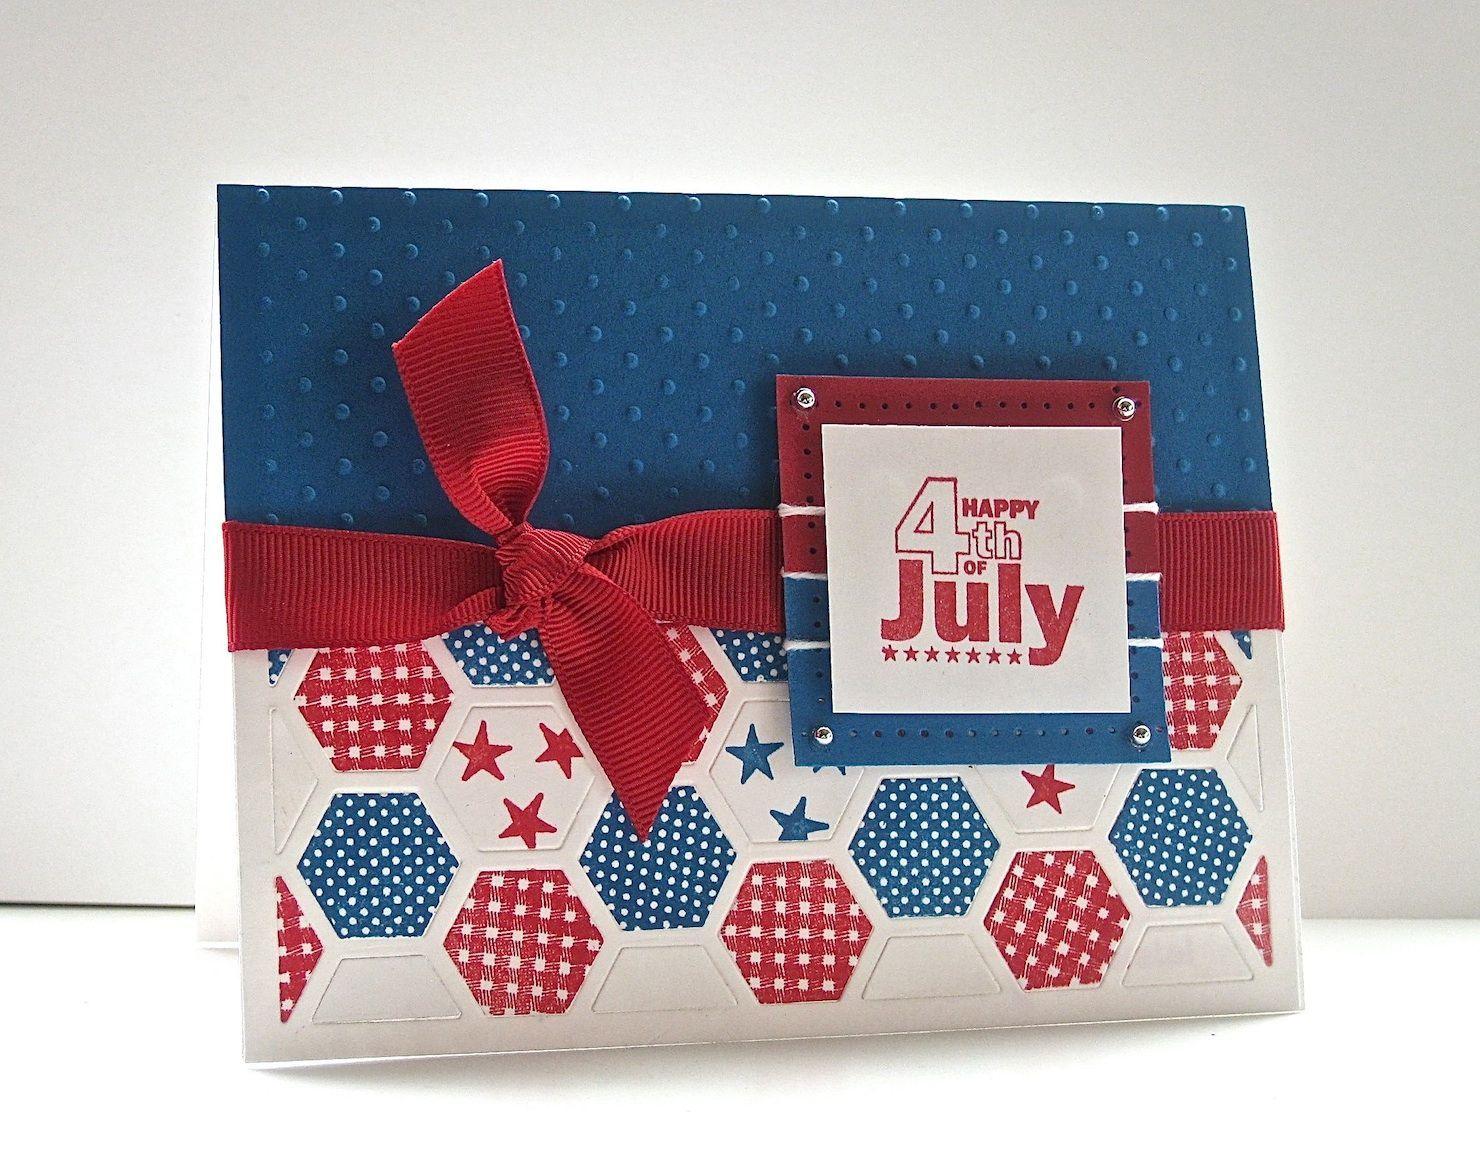 White and Red Filled Hexagon Logo - handmade 4th of July card. red white and blue. hexagon pattern